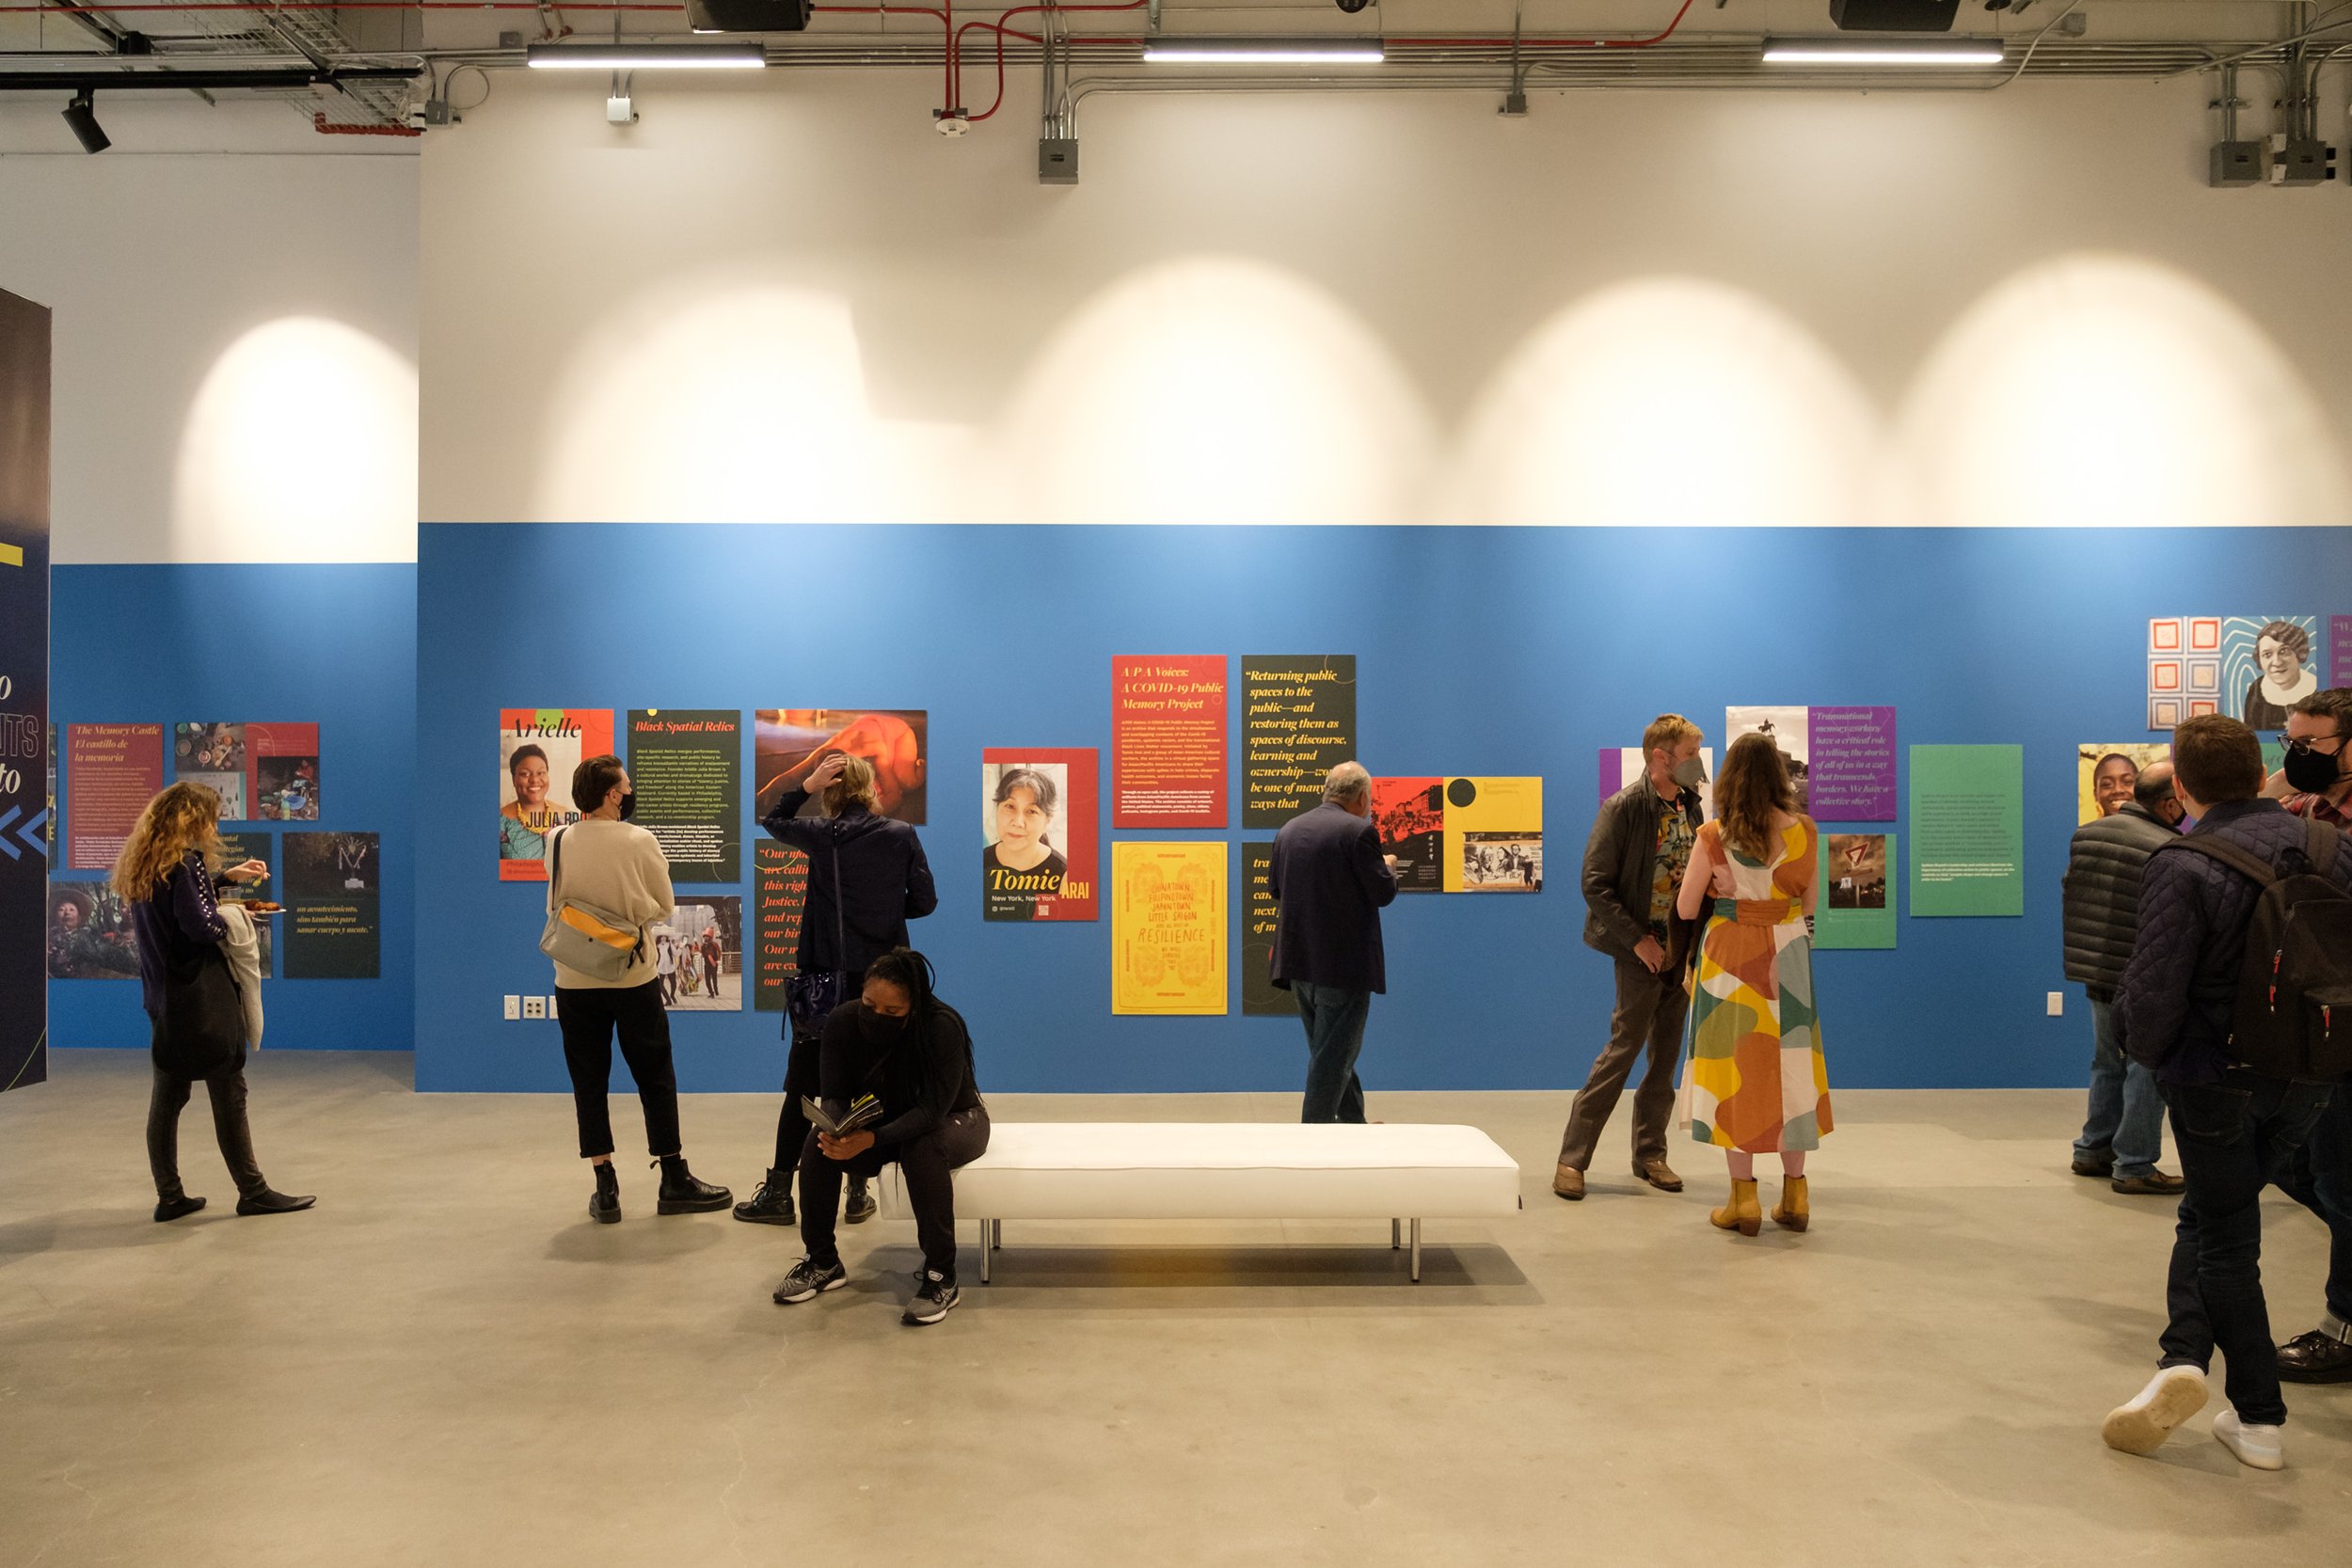 Shaping the Past Exhibition at Goethe-Institut LA courtesy of institute.jpg